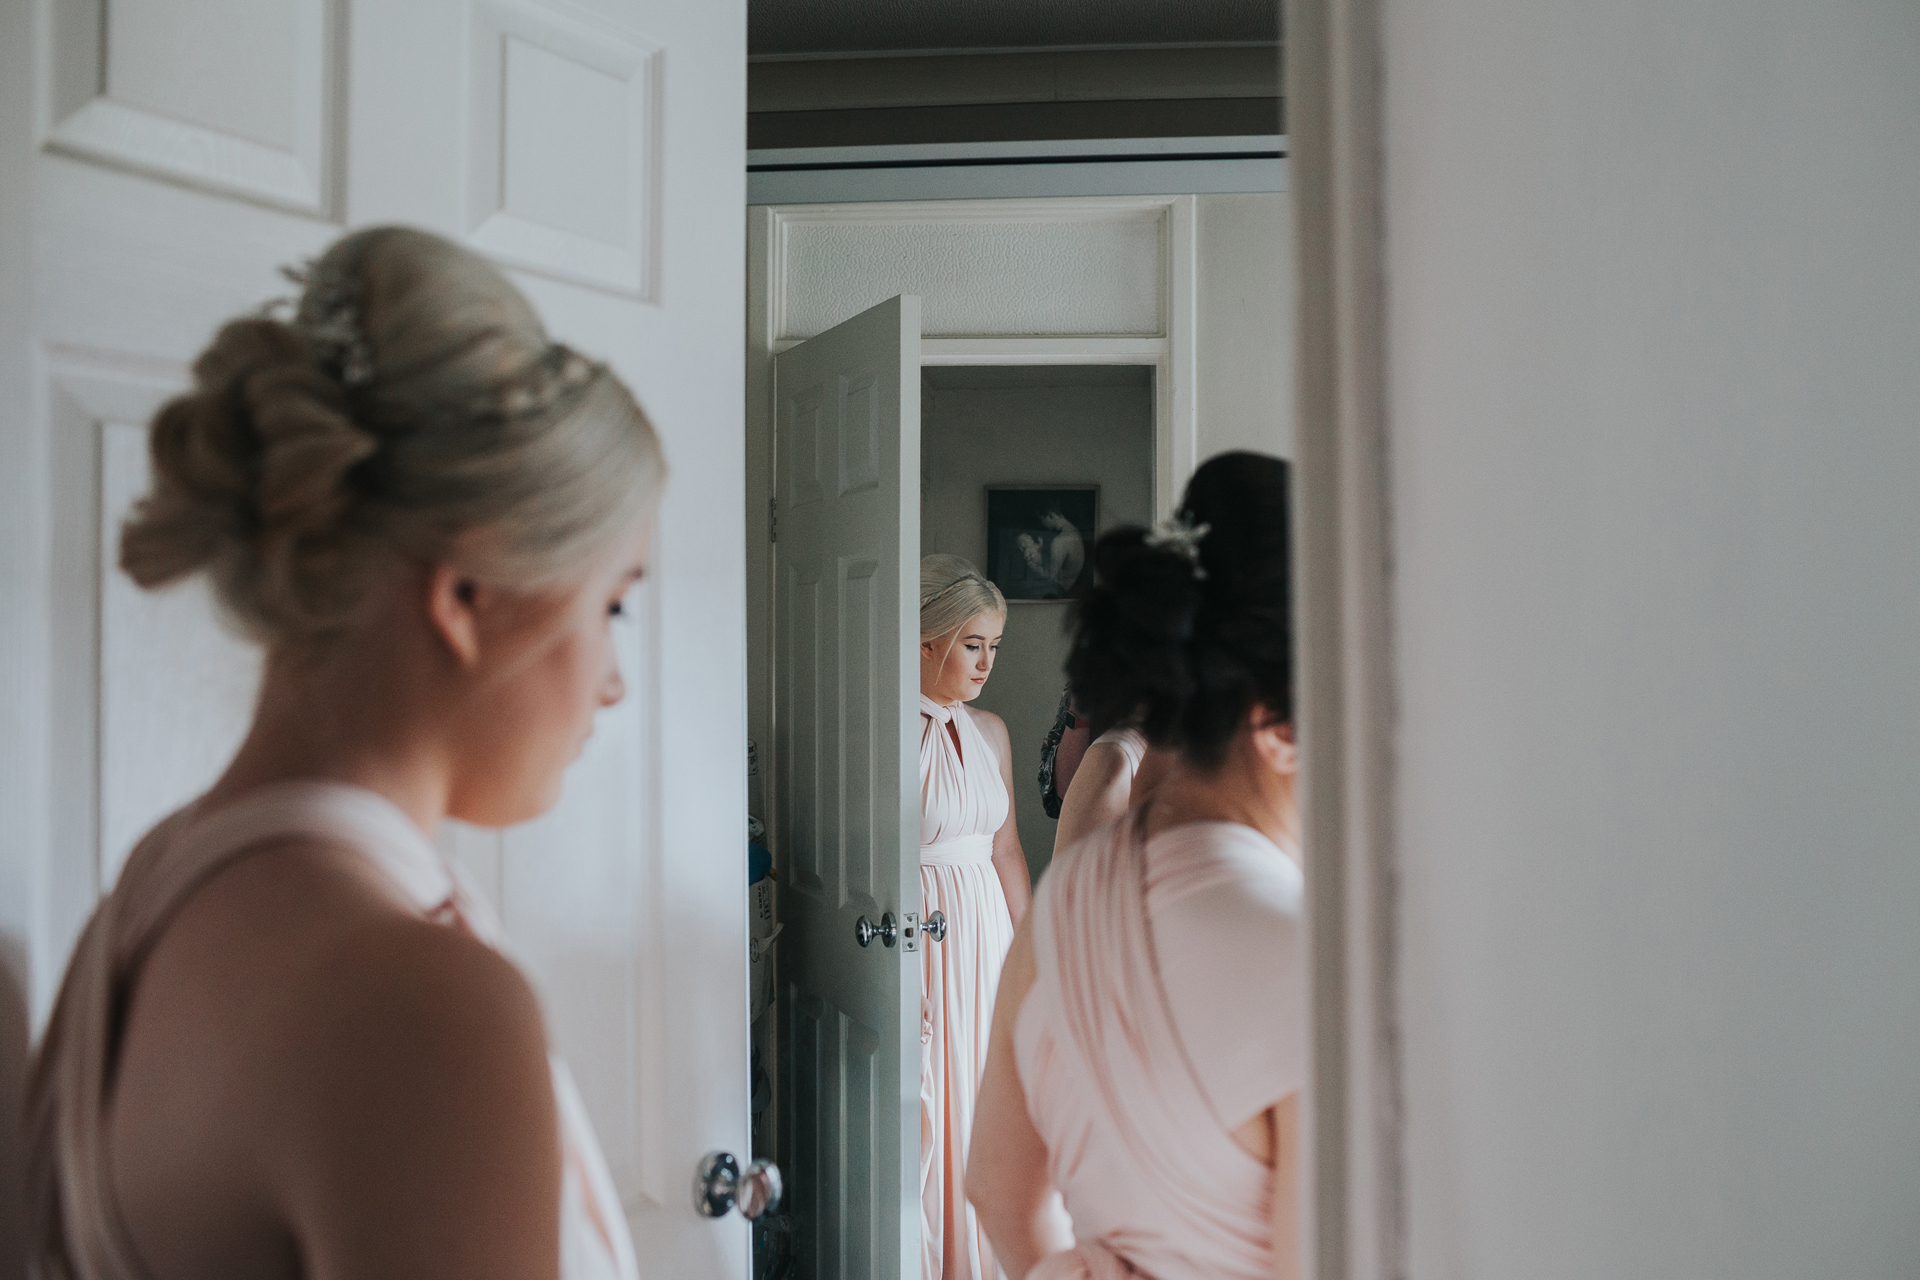 Bridesmaid waits outside the door for the bride, we see her in the foreground and back ground of the photograph as she is reflected in the mirror beyond the door. 